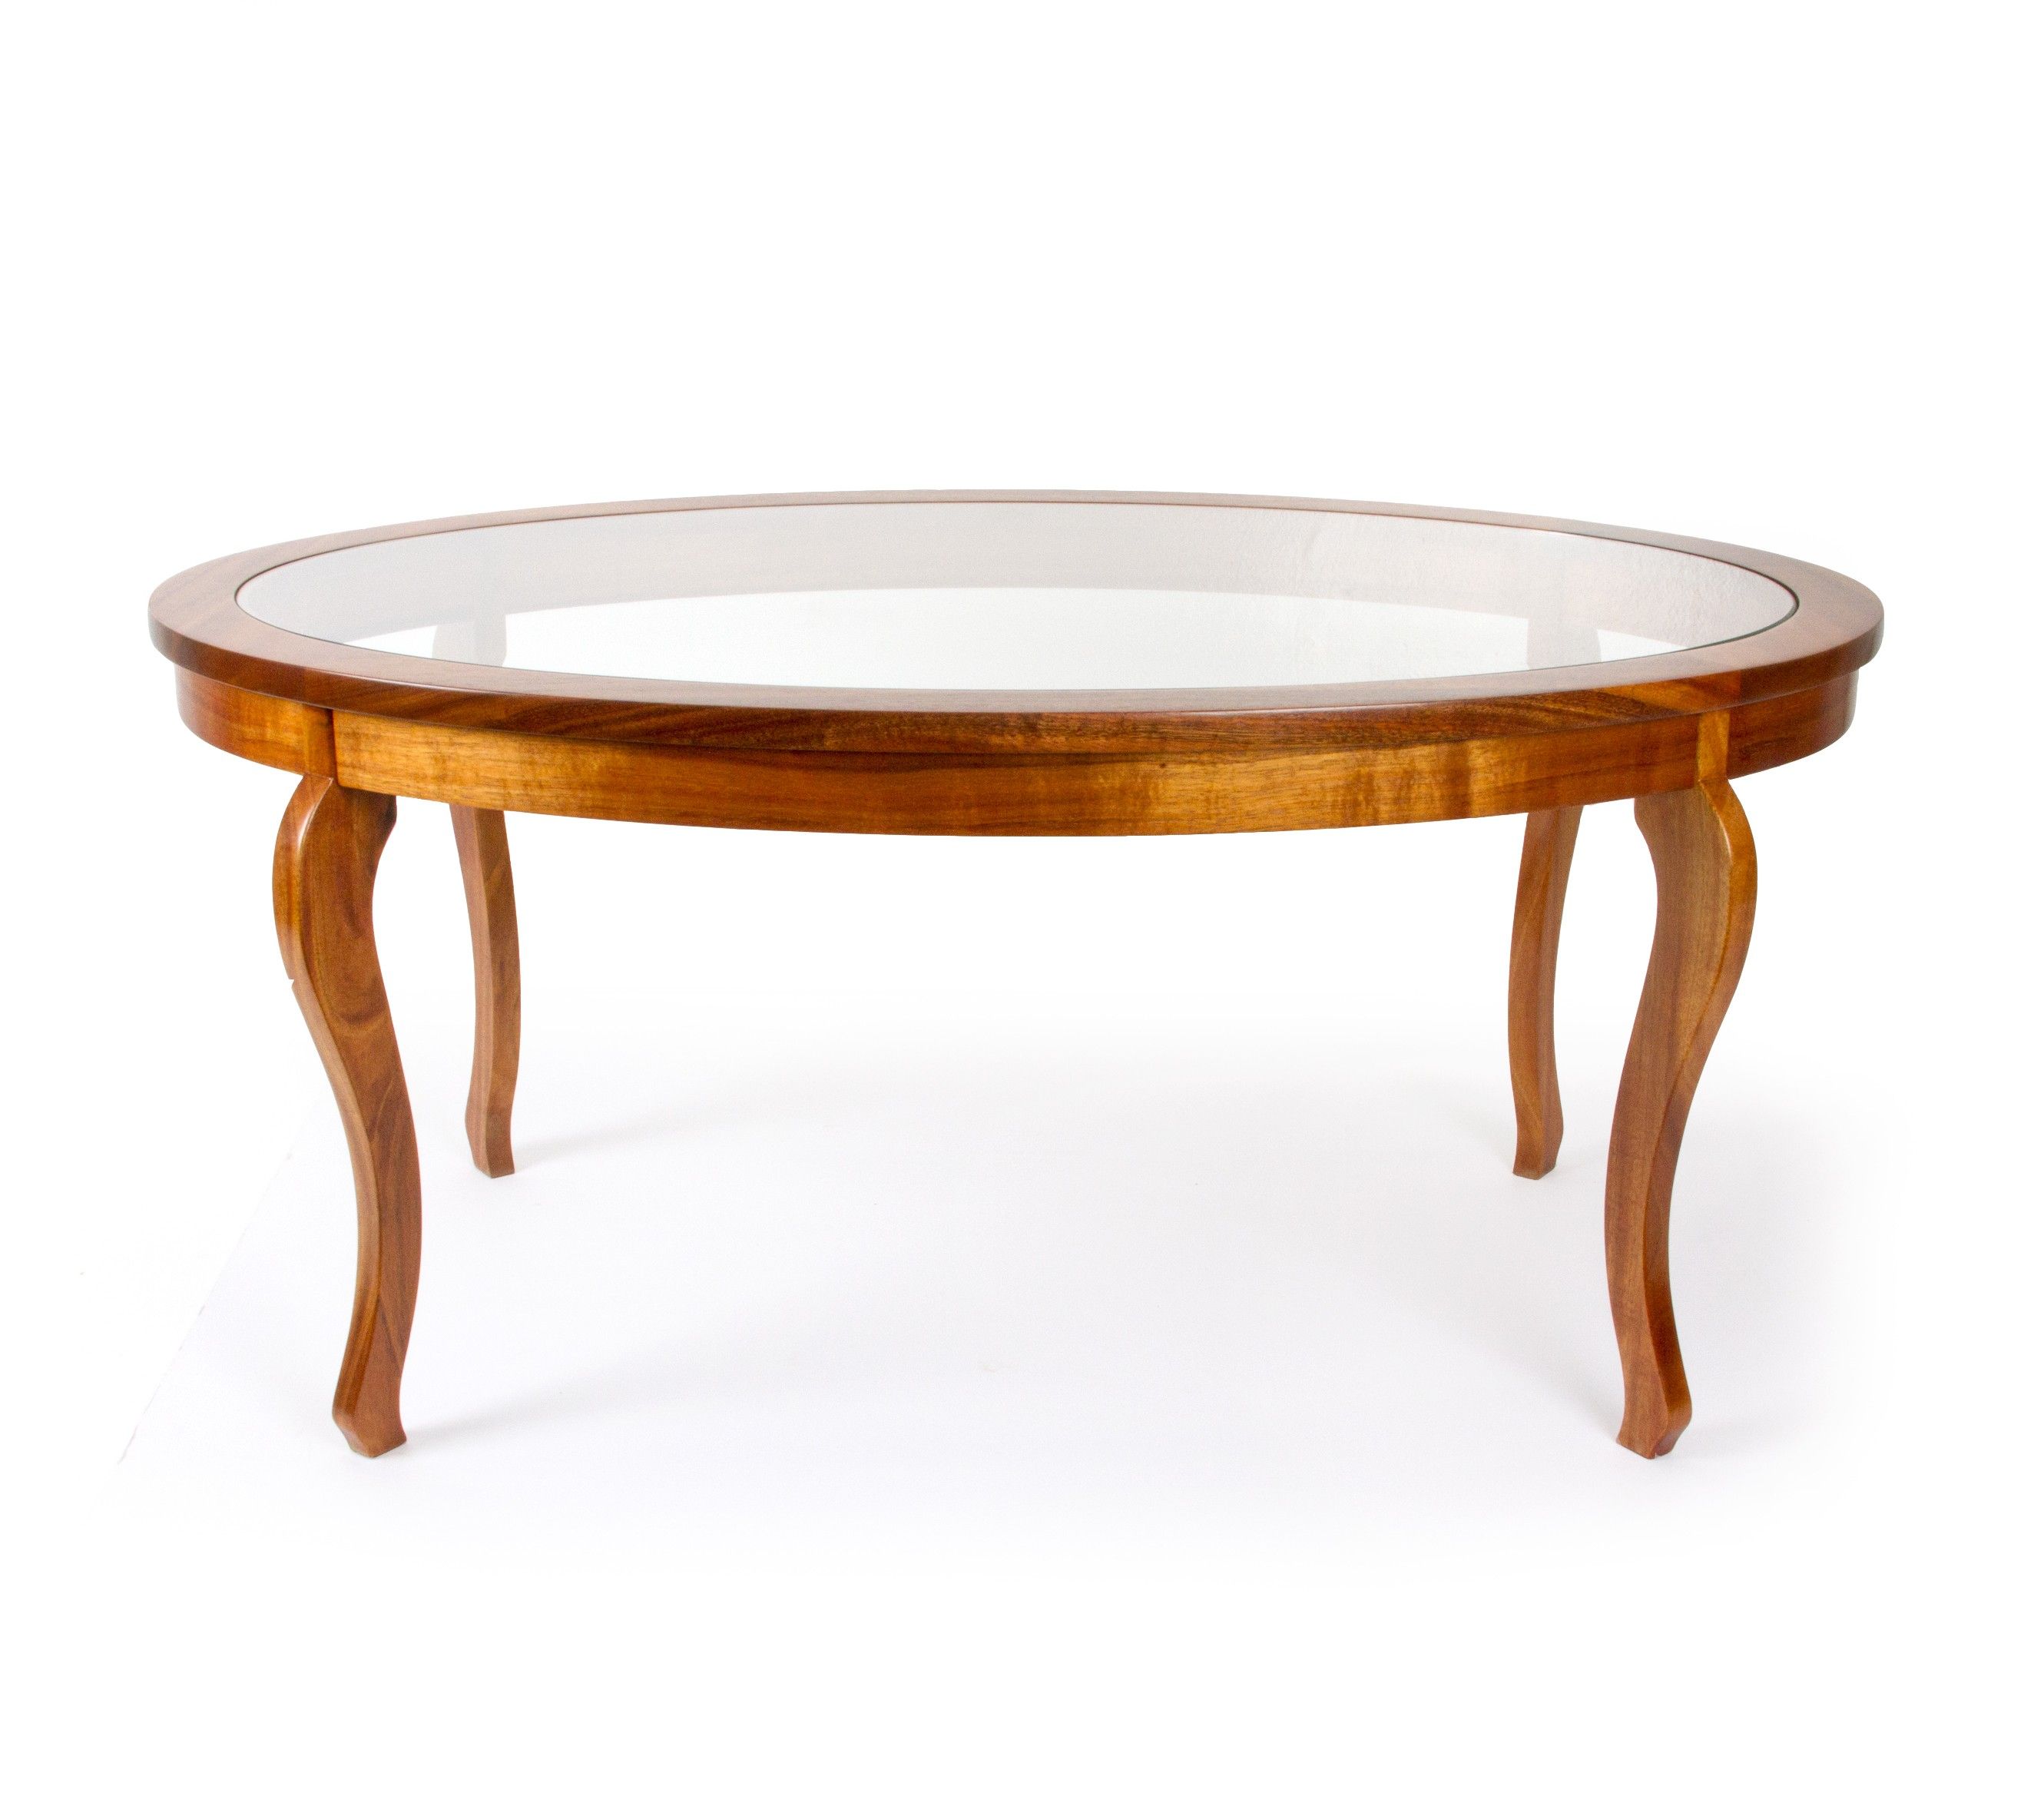 Small Oval Glass Coffee Table Rare Vintage Retro 60s A Younger Rustic Meets Elegant In This Spherical (View 7 of 10)